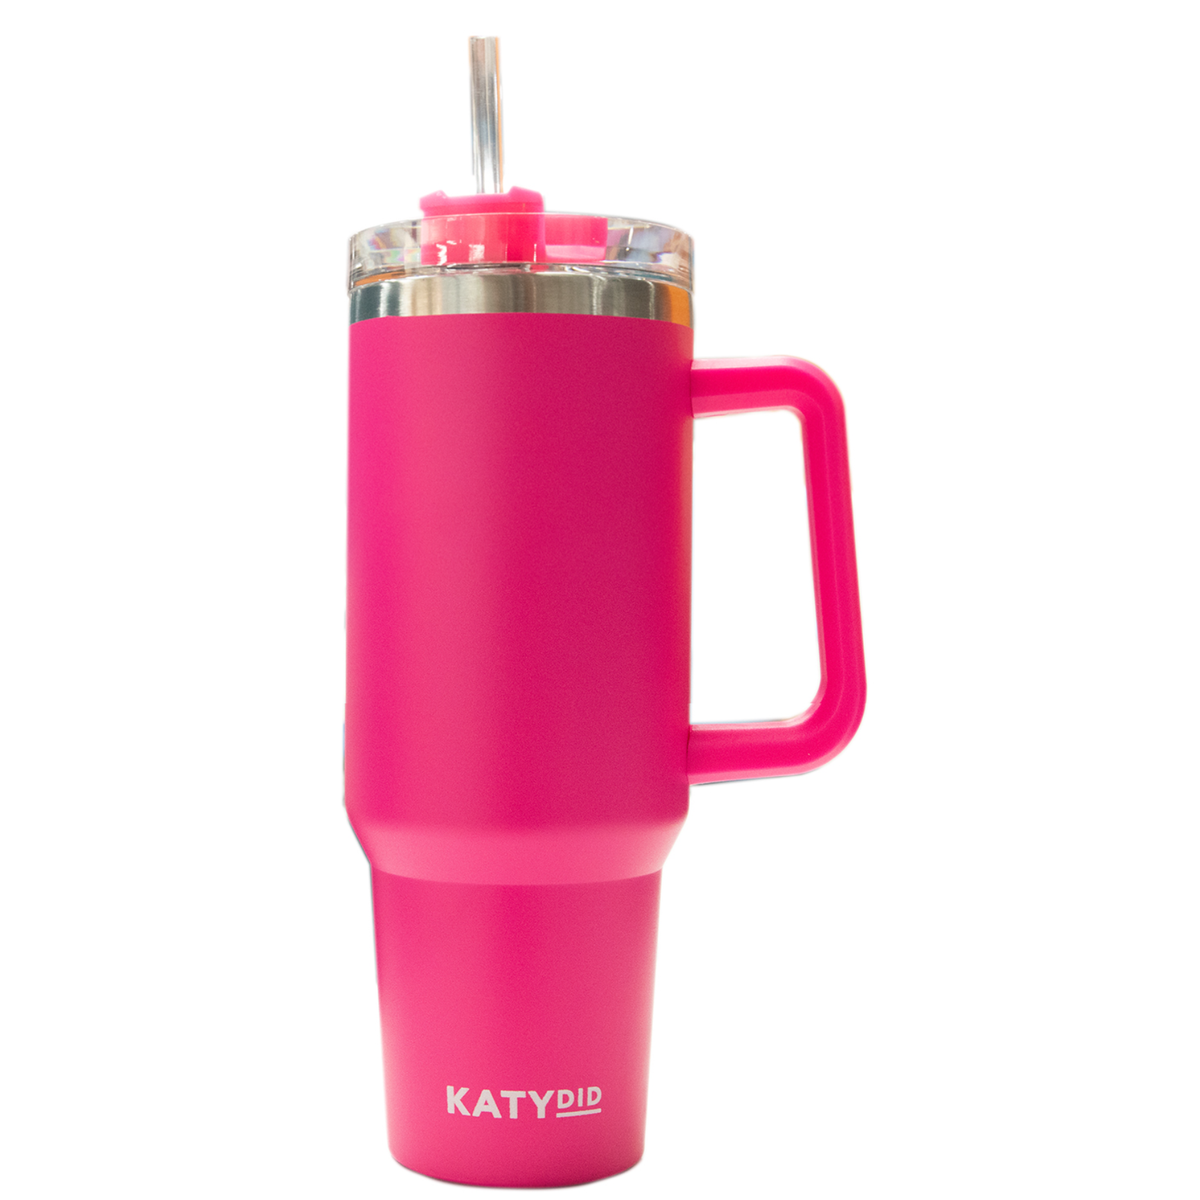 40 Oz. Hot Pink Katydid Stainless Steel Tumbler with Handle and Straw –  Steve's Hallmark